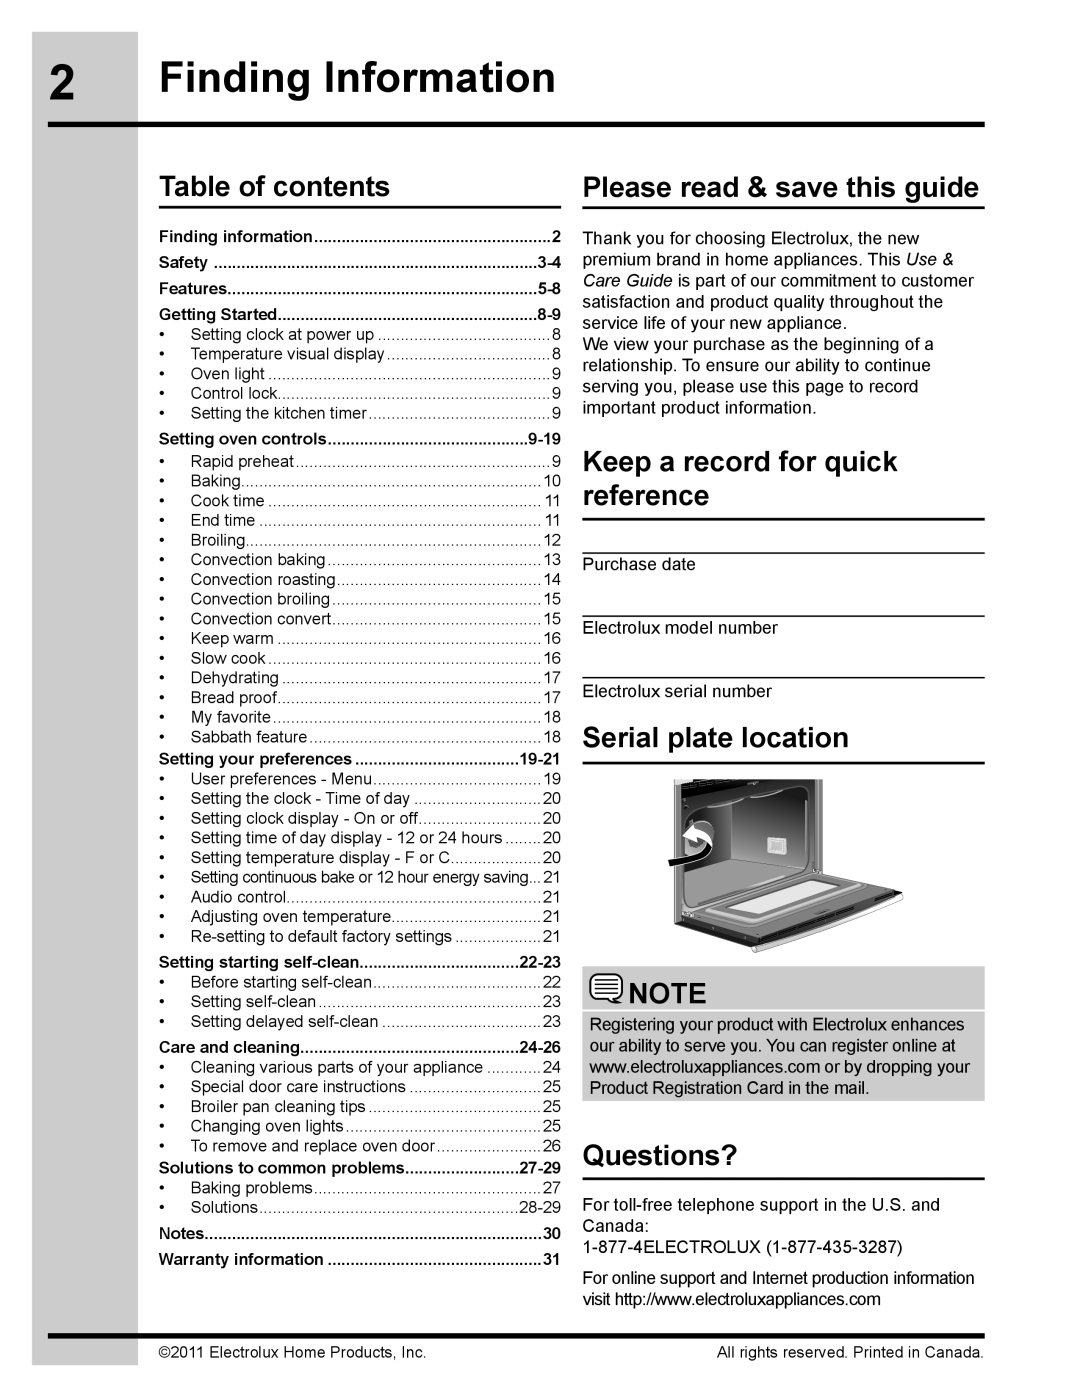 Electrolux 318205134 manual Finding Information, Table of contents, Please read & save this guide, Serial plate location 